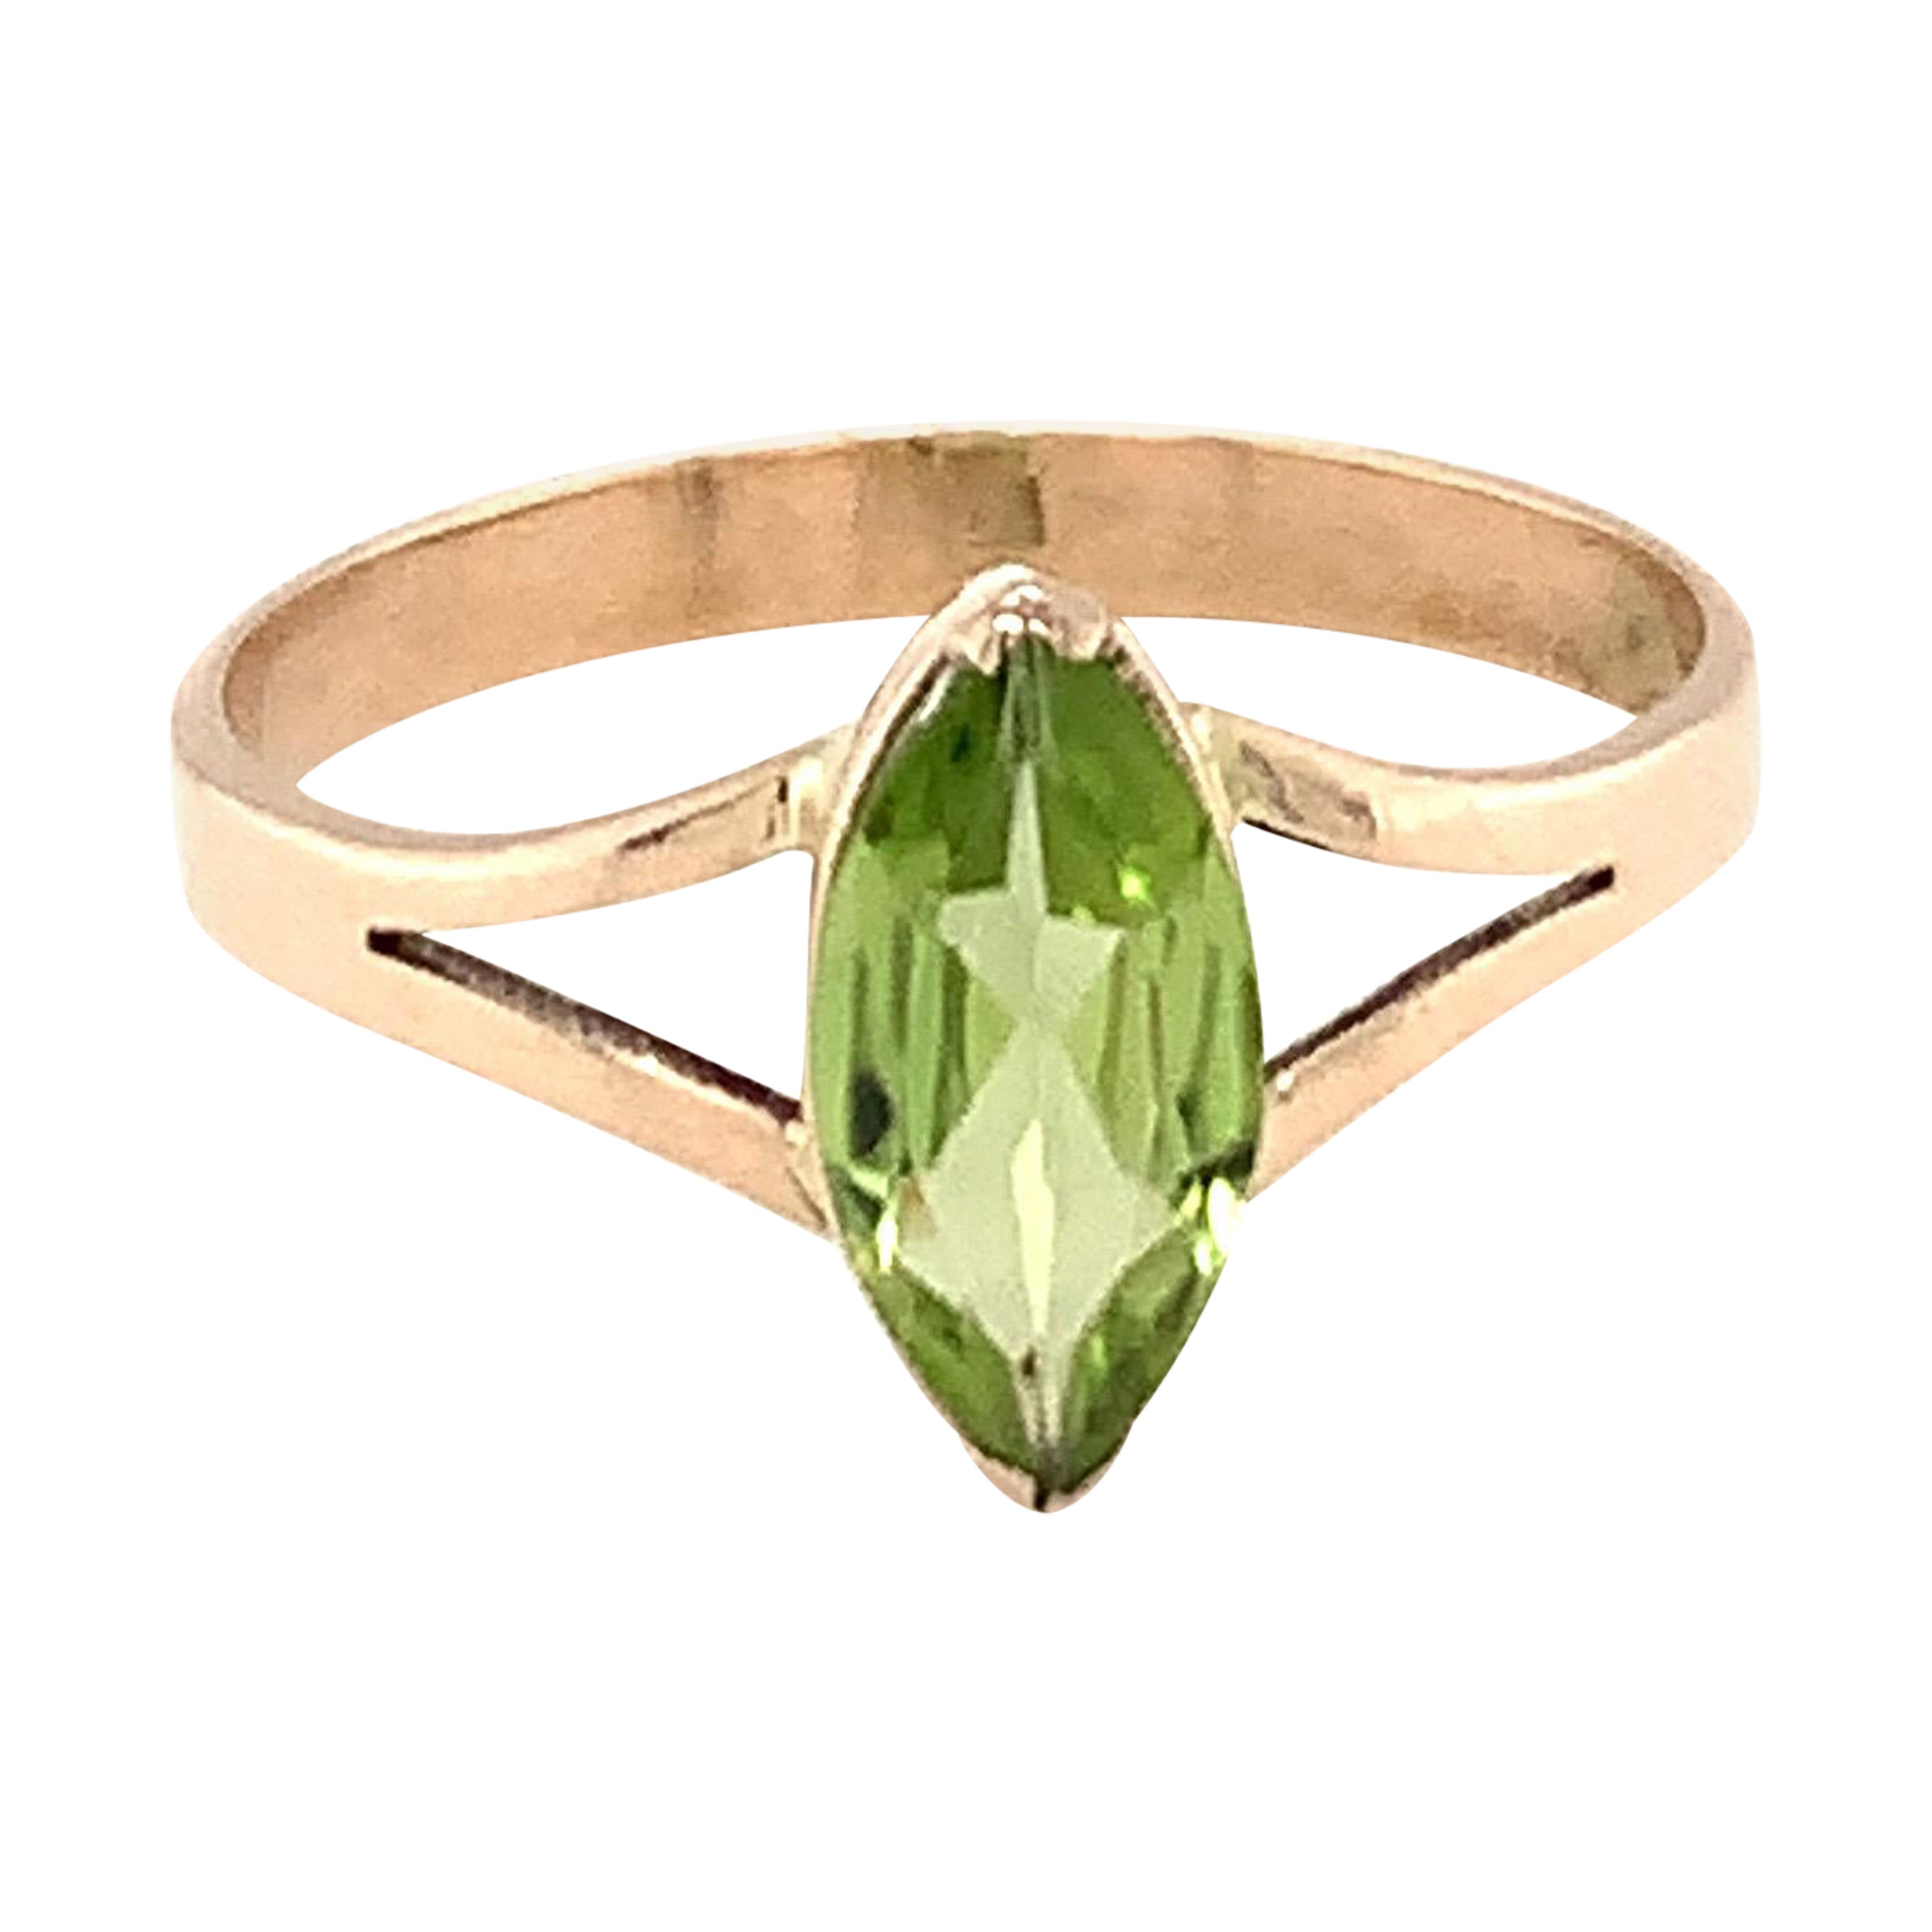 Marquise Cut Peridot Ring Set in 14k Yellow Gold